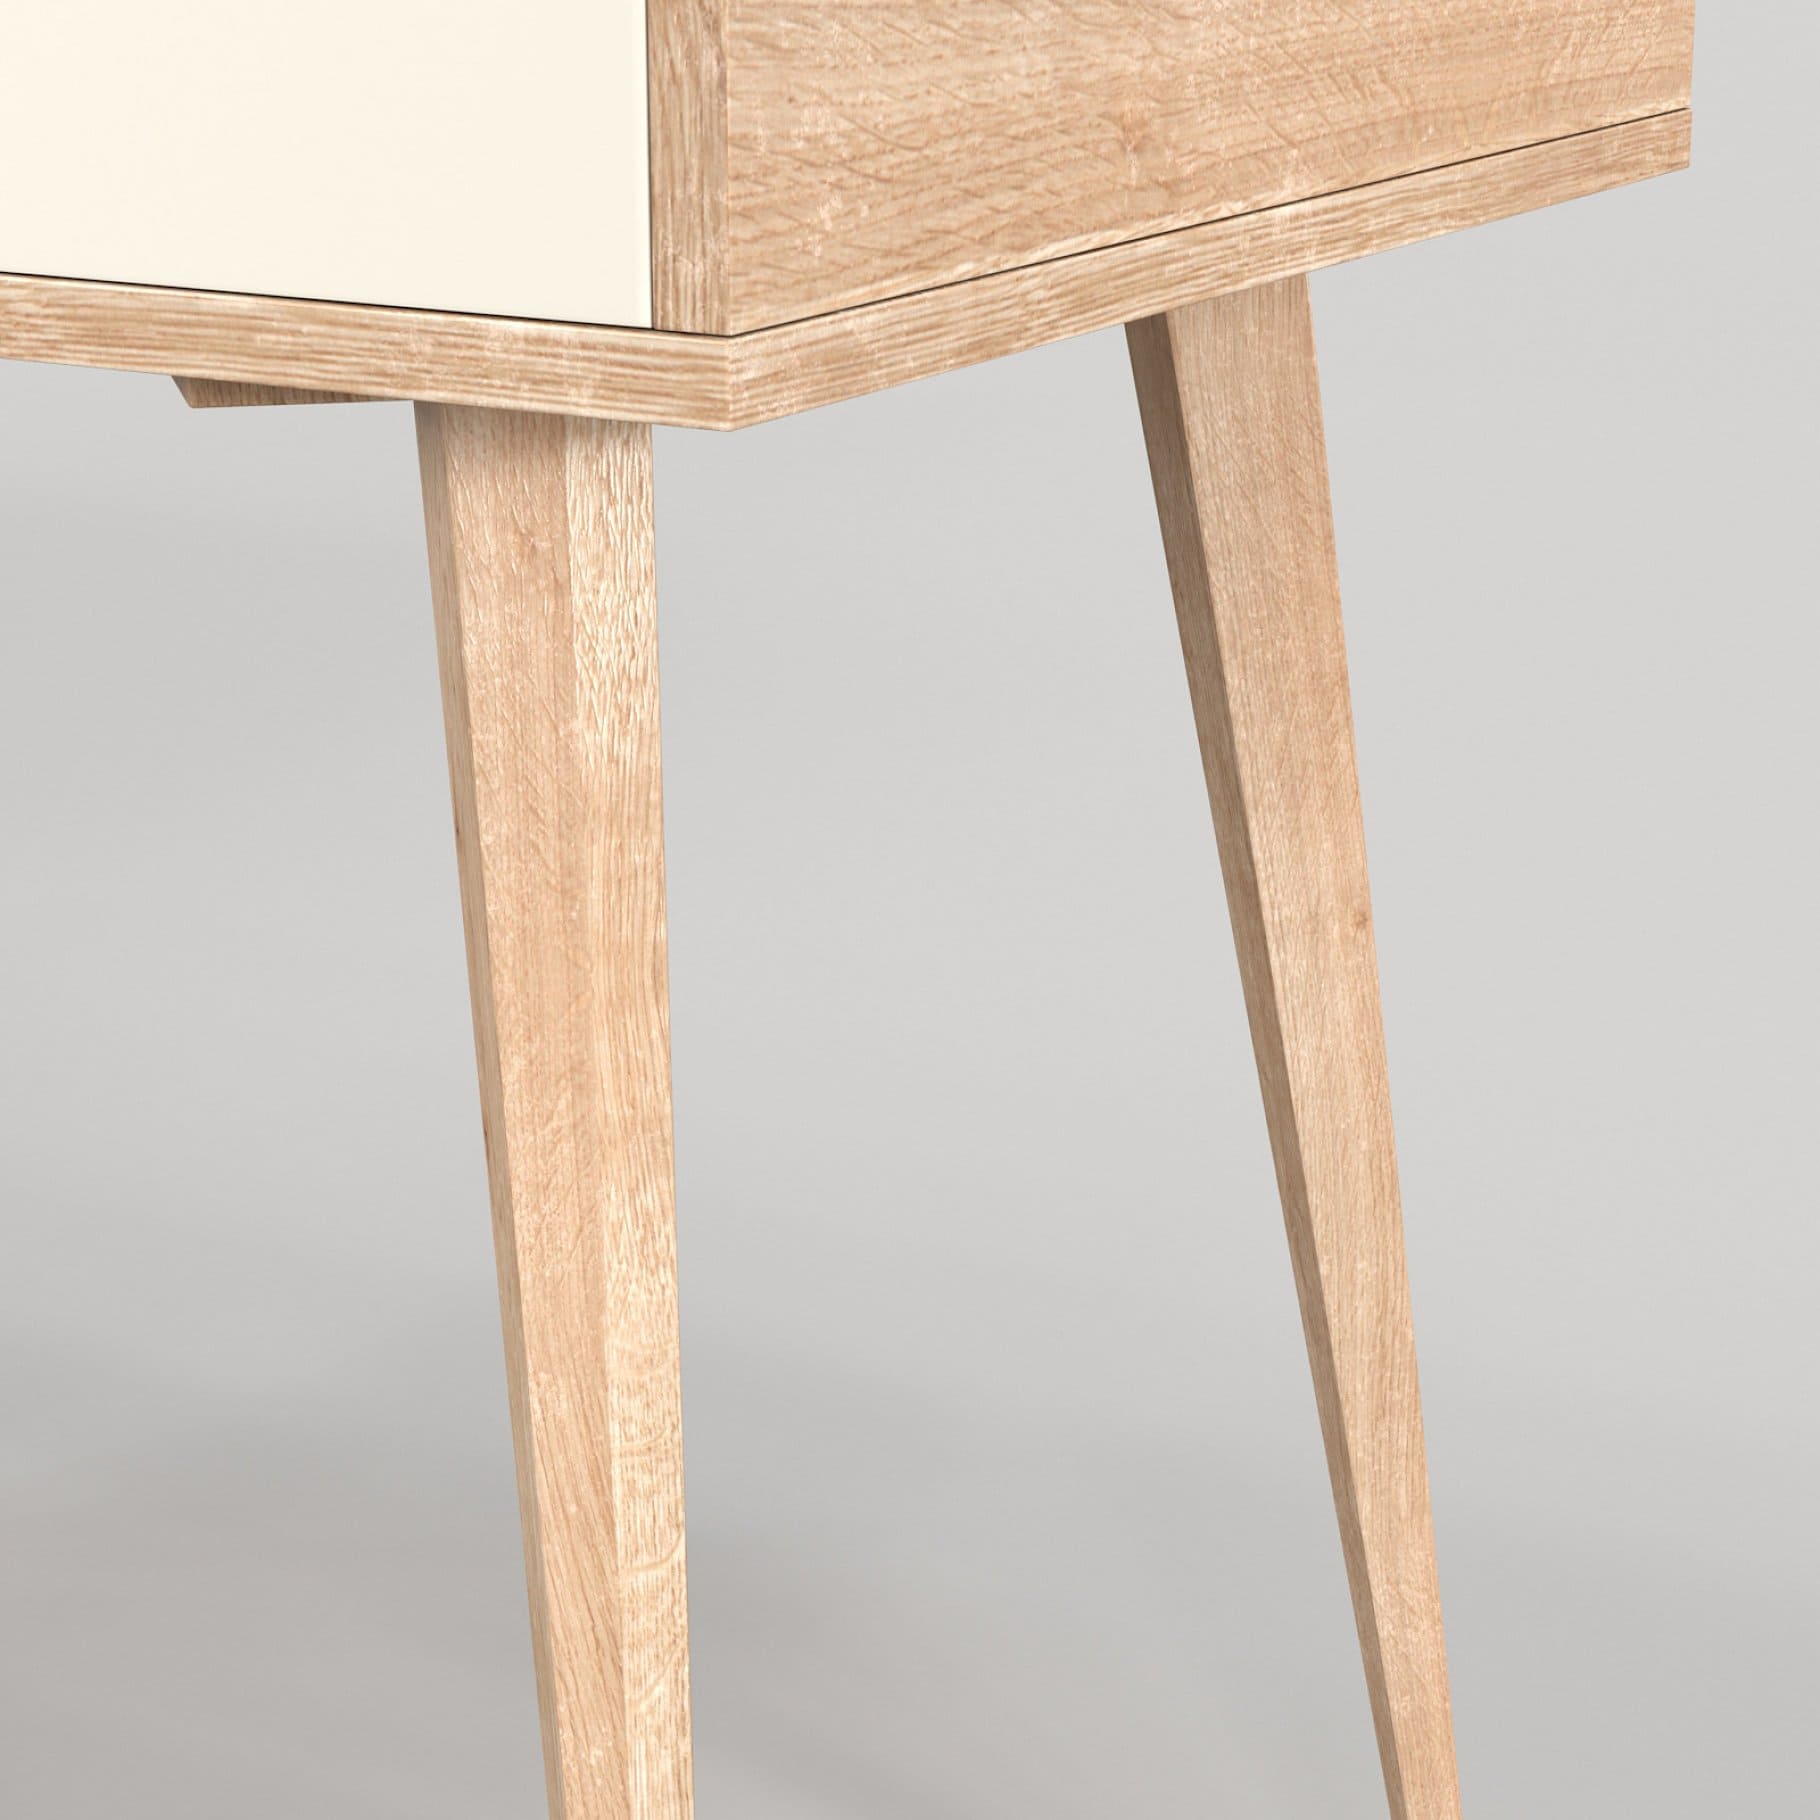 Photo of the lower corner of the brown wooden Scandinavian desk with shelves model 04.